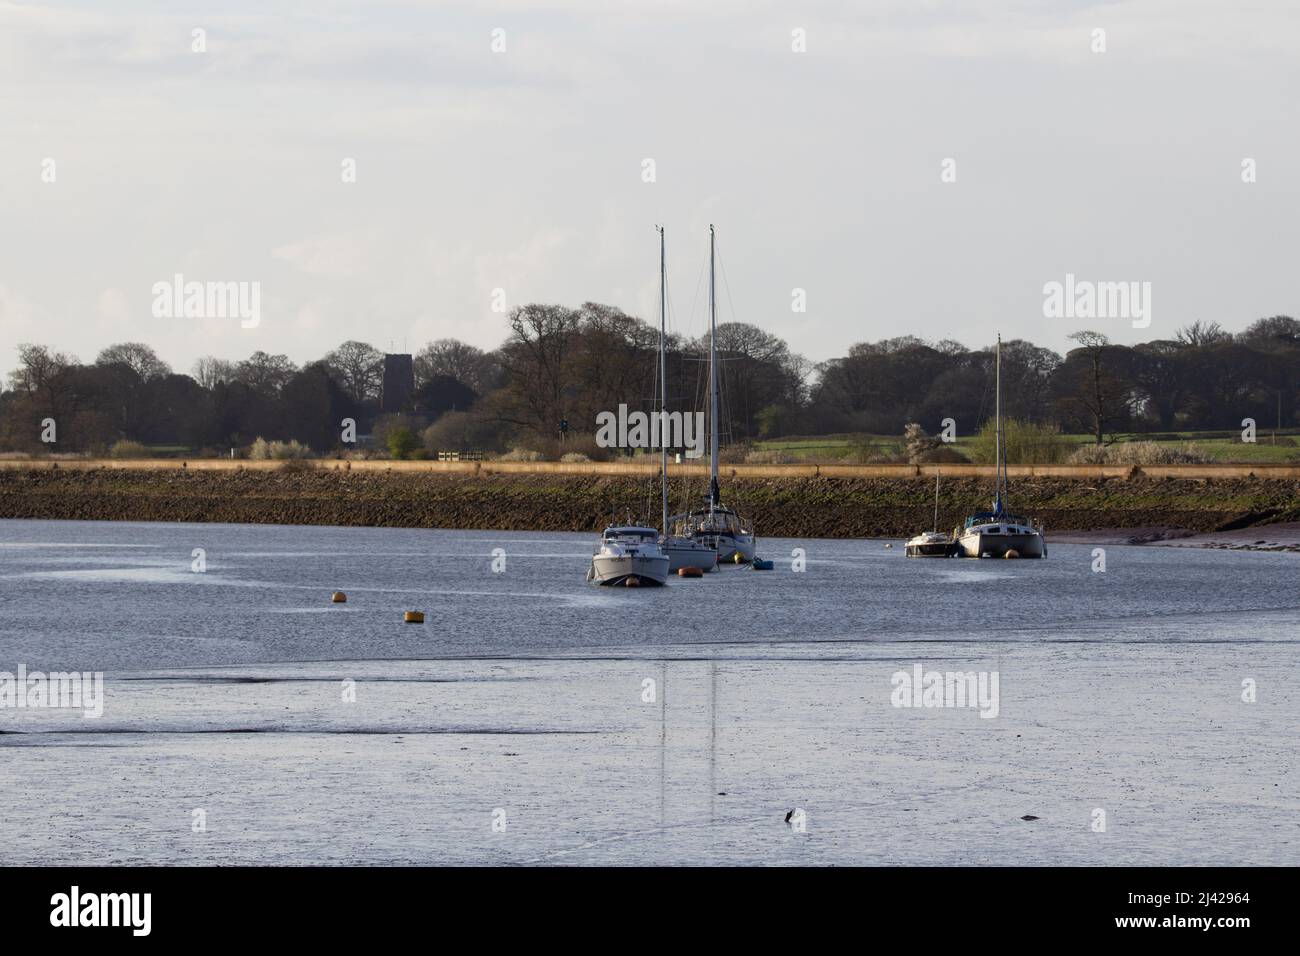 EXETER, UK - APRIL 6, 2021 sailboats moored in the Exe estuary with flood defence in the background Stock Photo